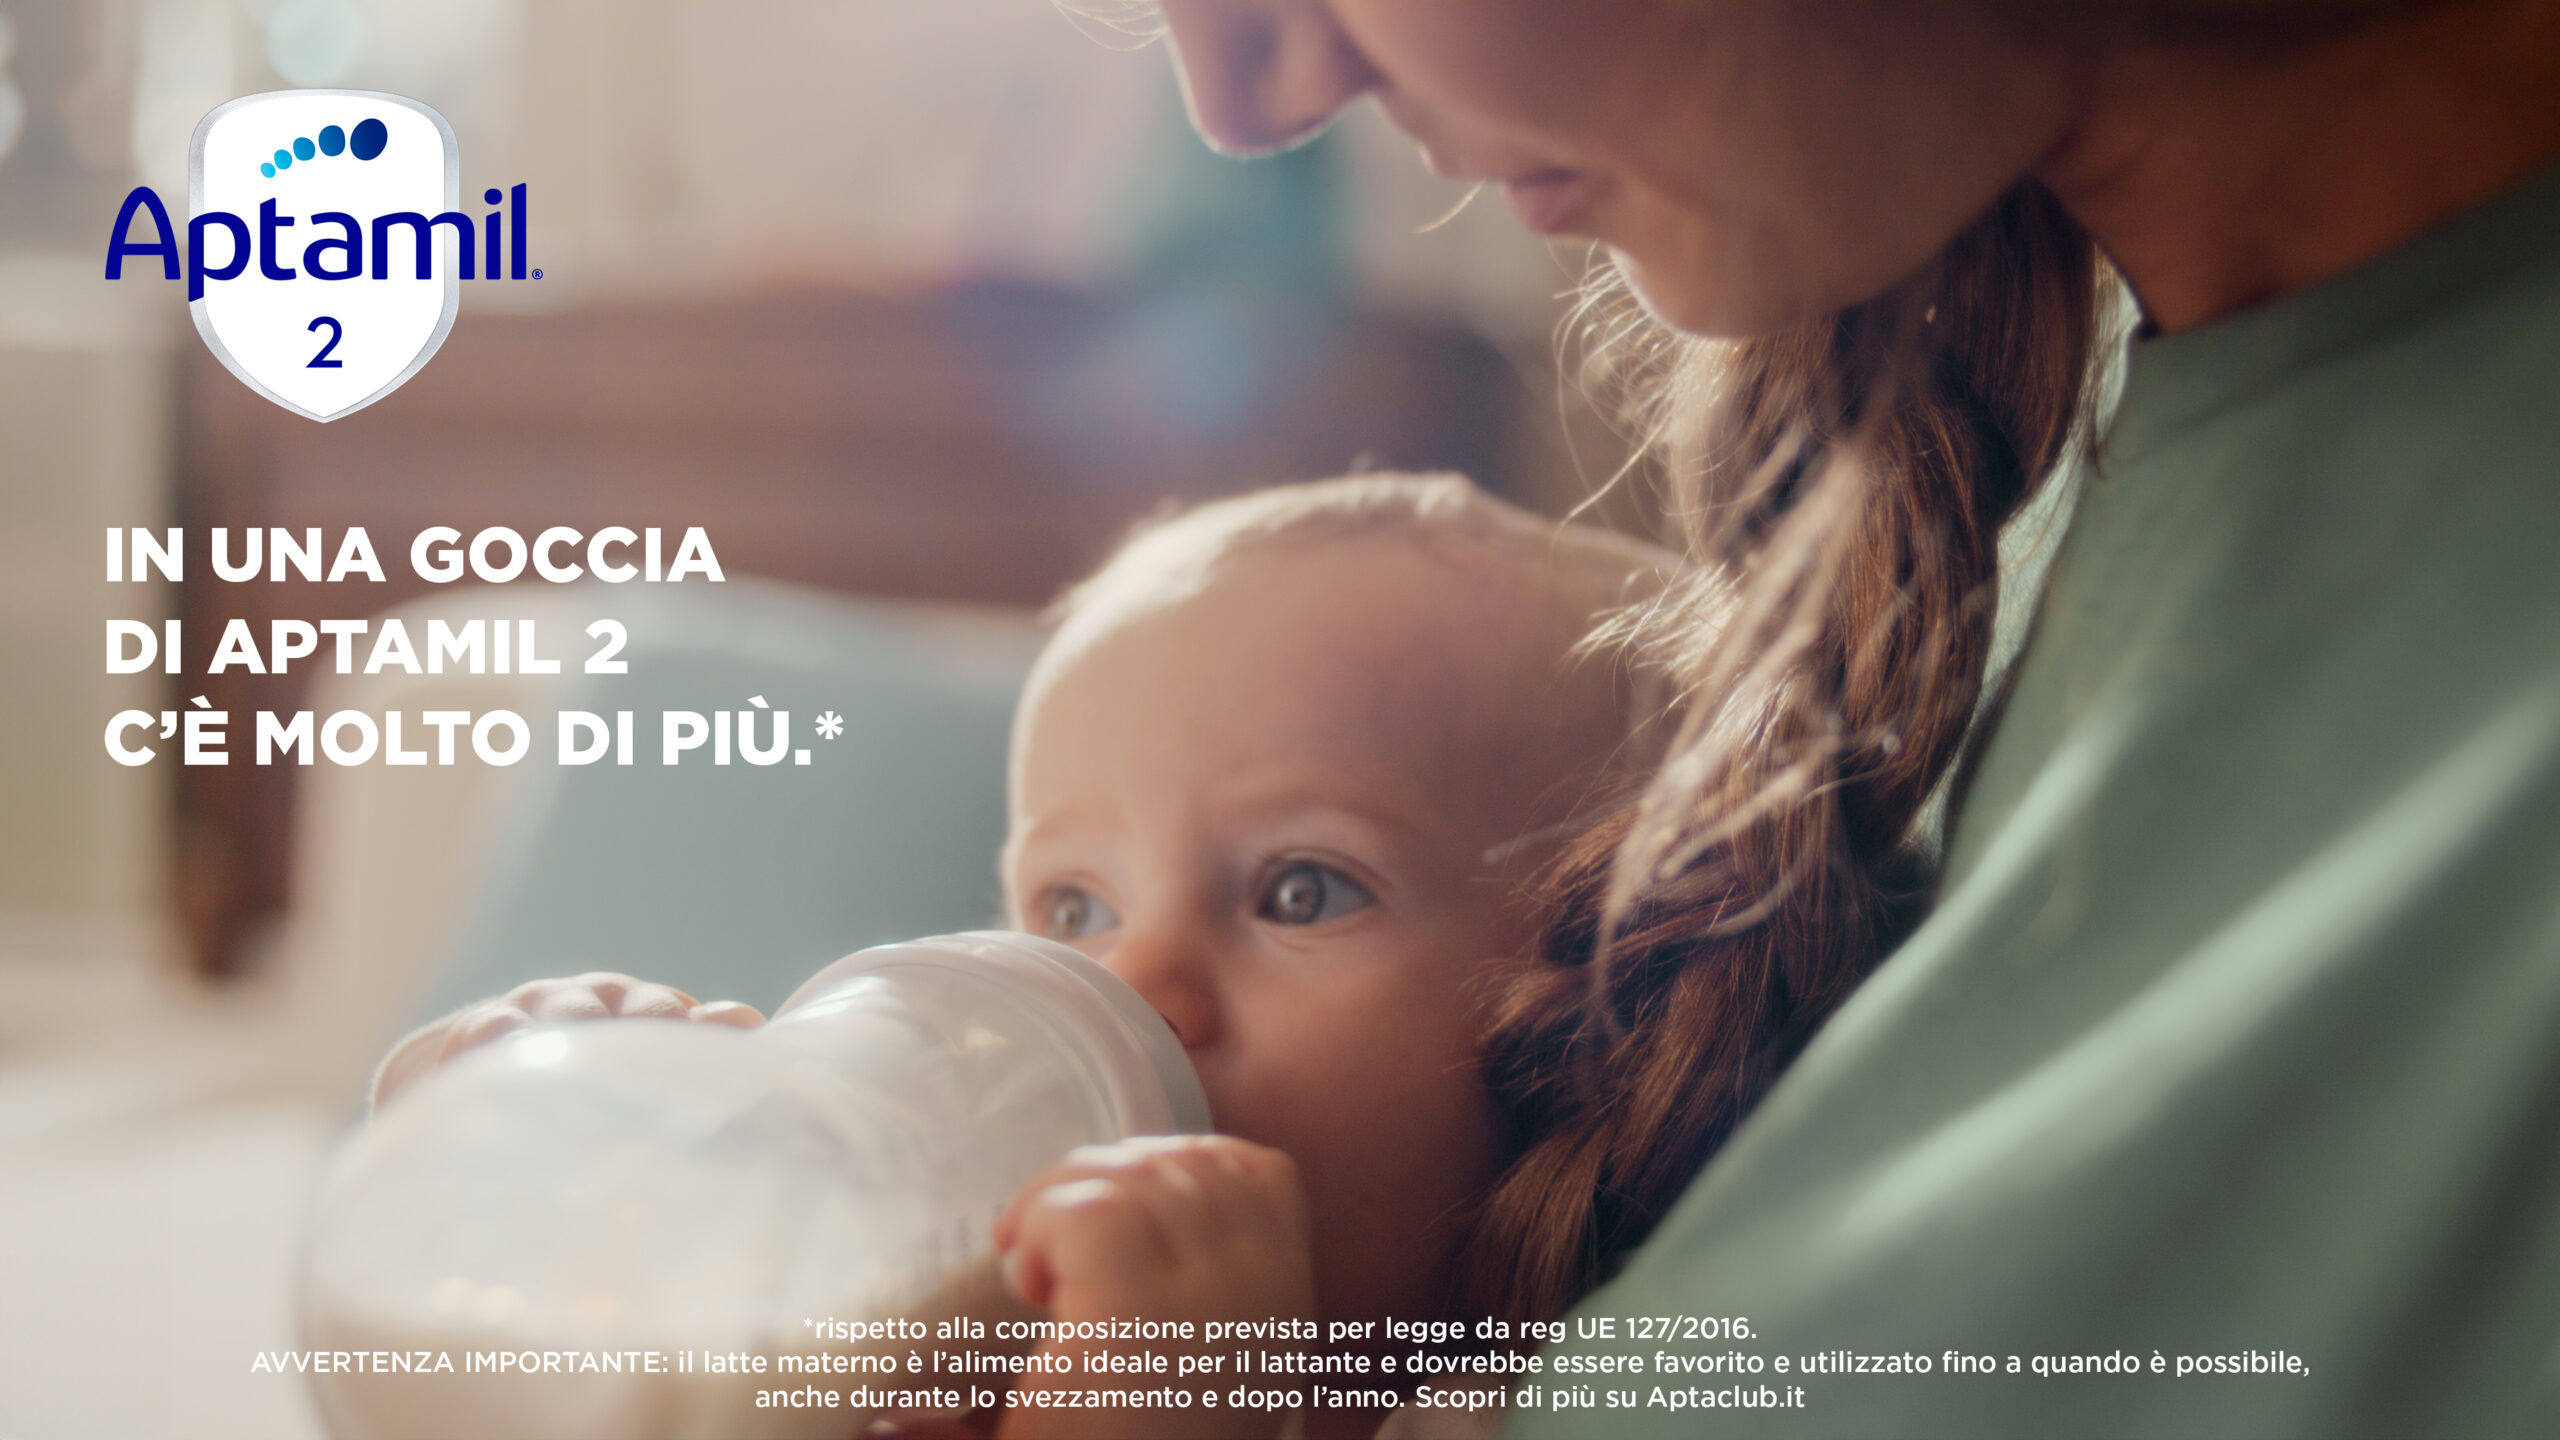 <strong>Danone’s Aptamil 2 and Armando Testa together for the new baby milk campaign making a big return to TV.</strong>